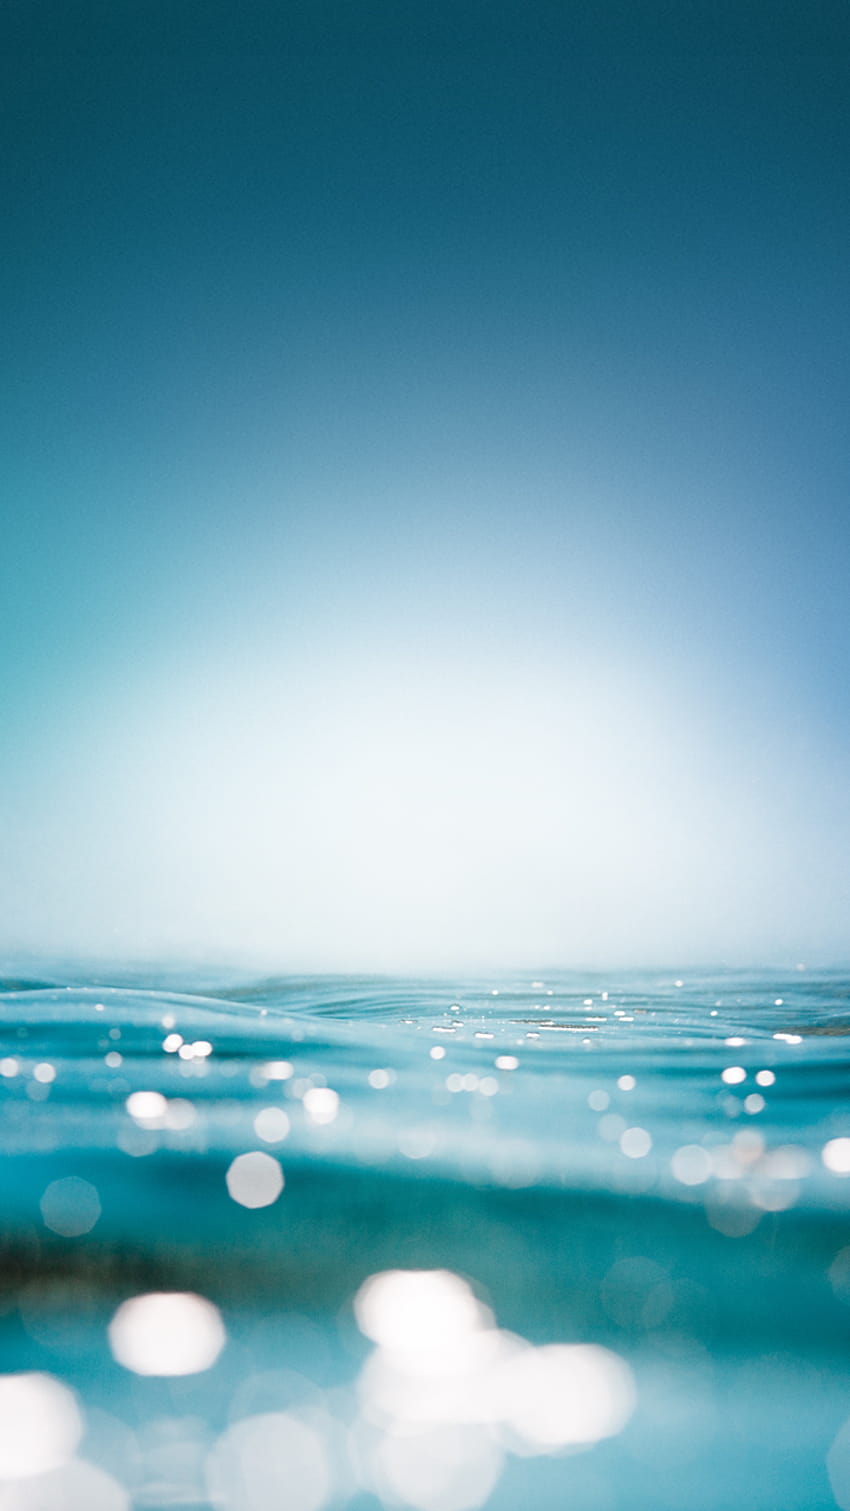 HTC Desire 626 : Above Sealevel Android, sea level HD phone wallpaper